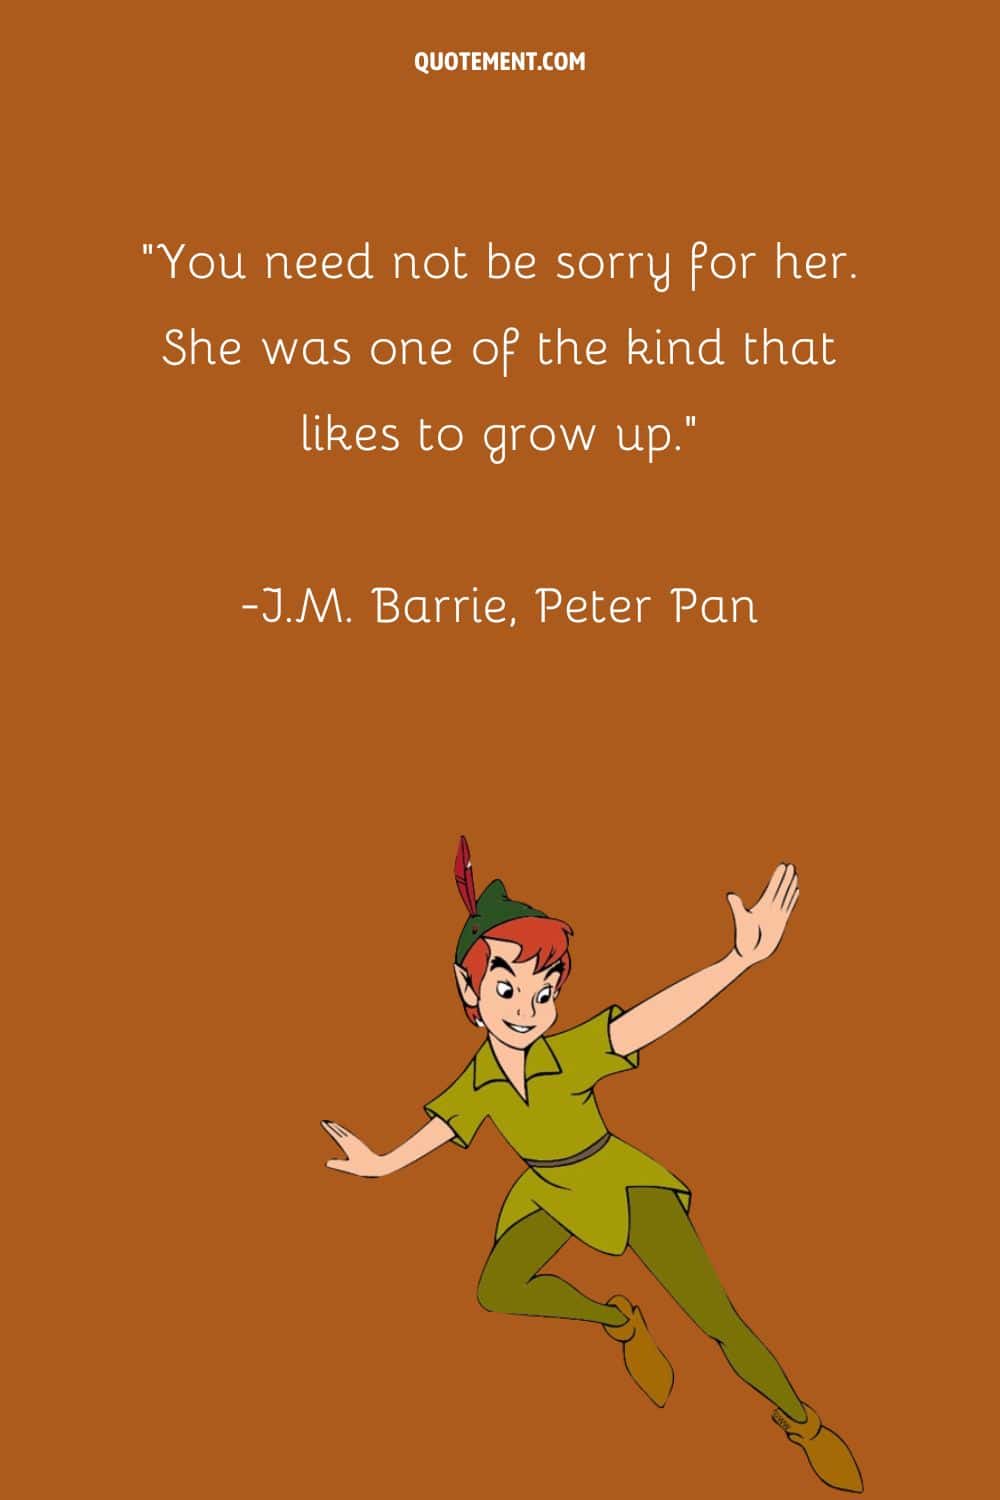 “You need not be sorry for her. She was one of the kind that likes to grow up.” ― J.M. Barrie, Peter Pan